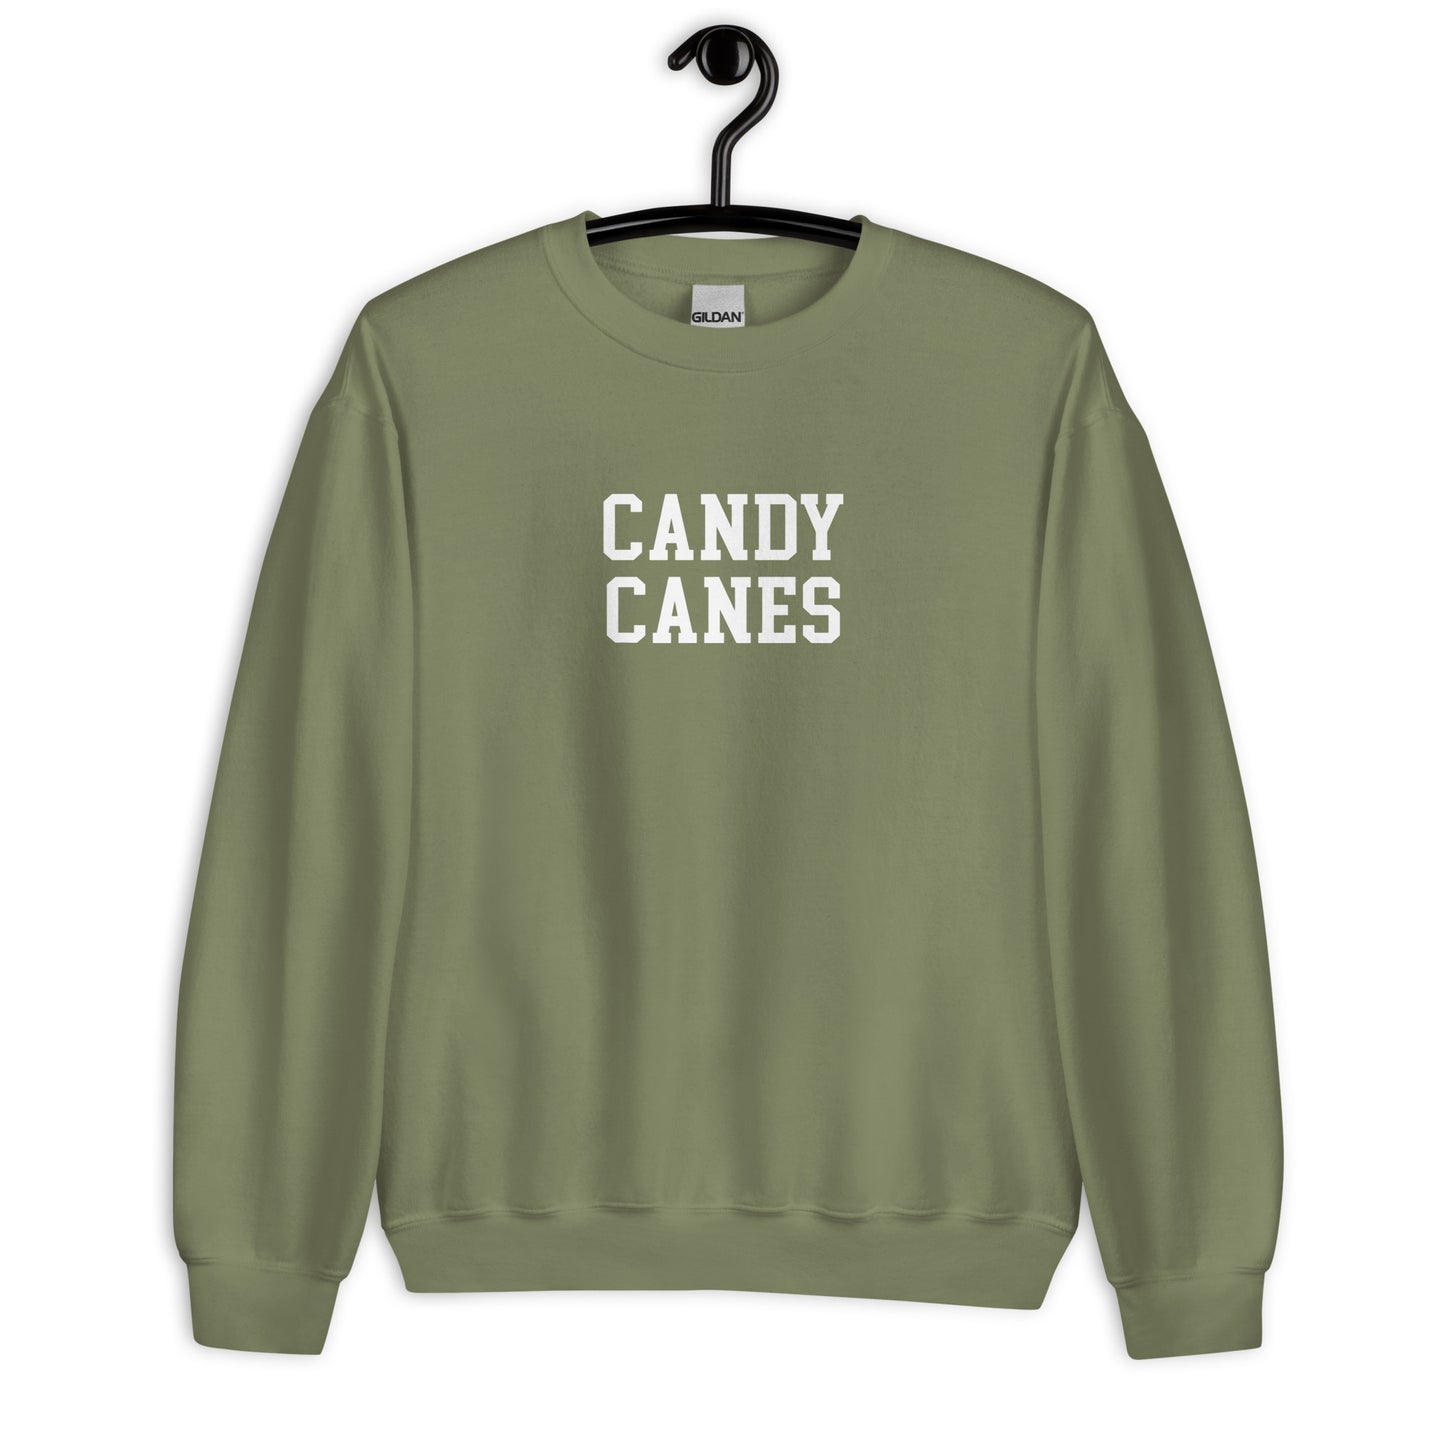 Candy Canes Sweatshirt - Straight Font